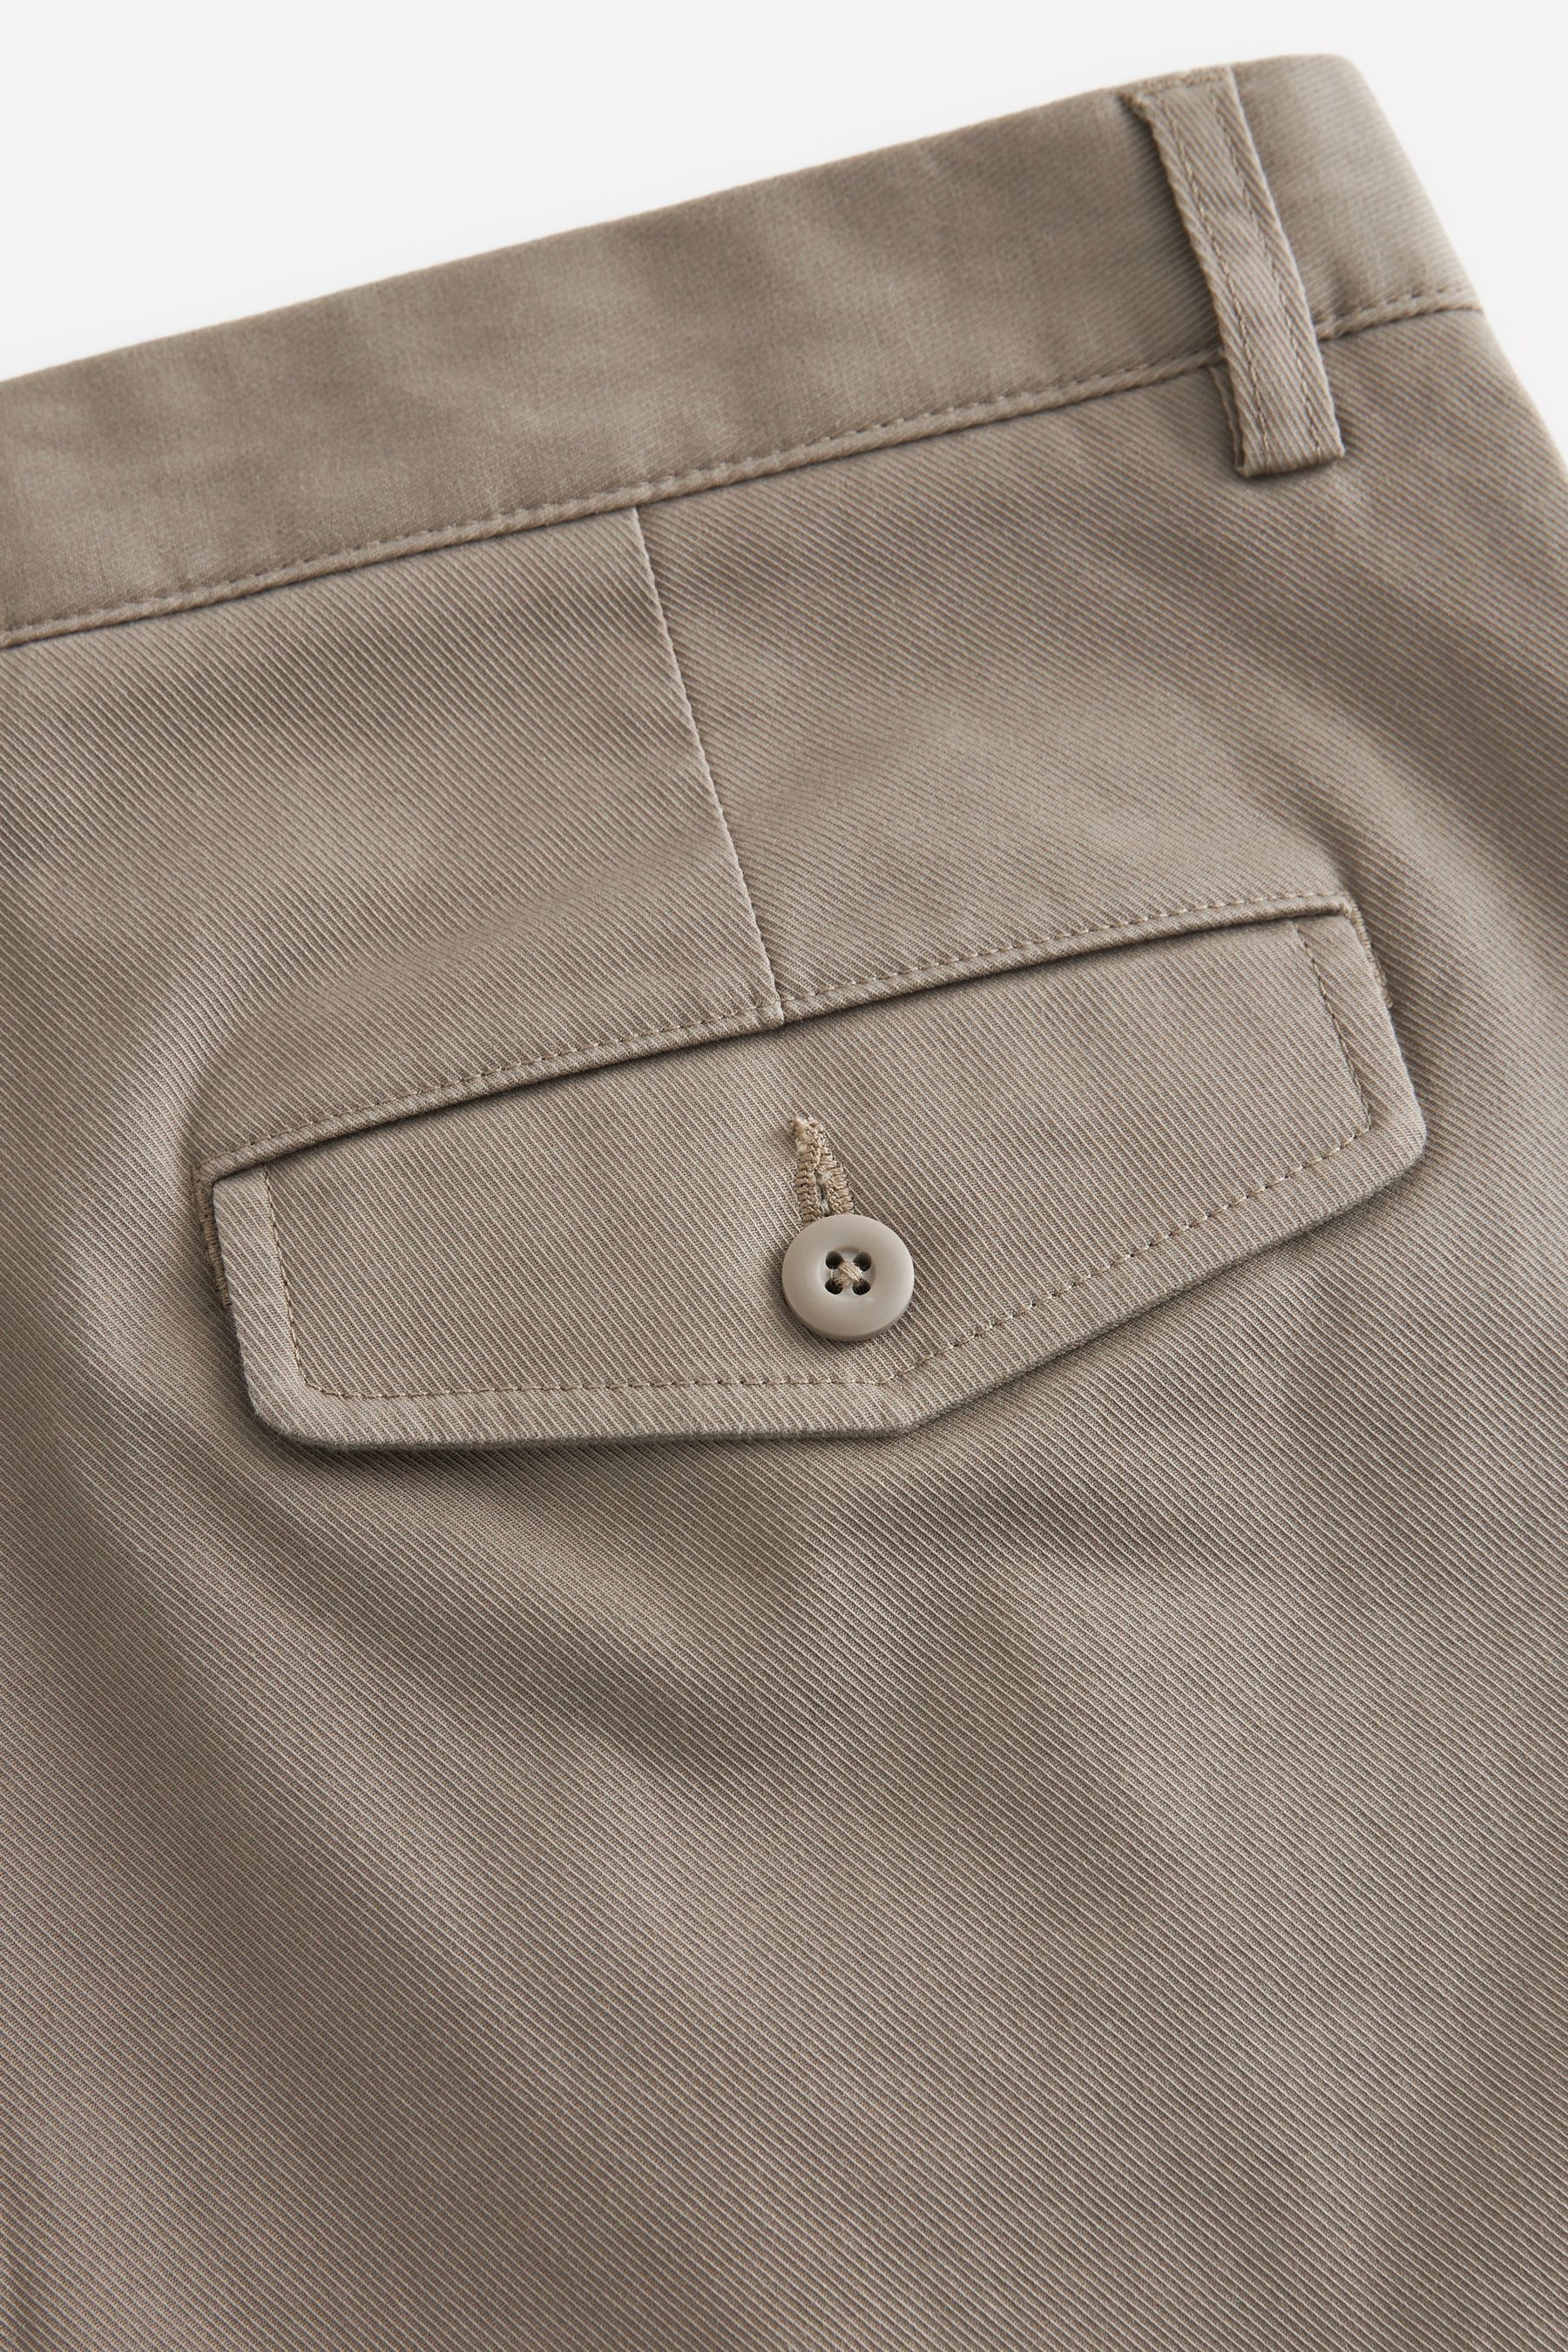 Buy Grey Twin Pleat Stretch Chinos Trousers from the Next UK online shop